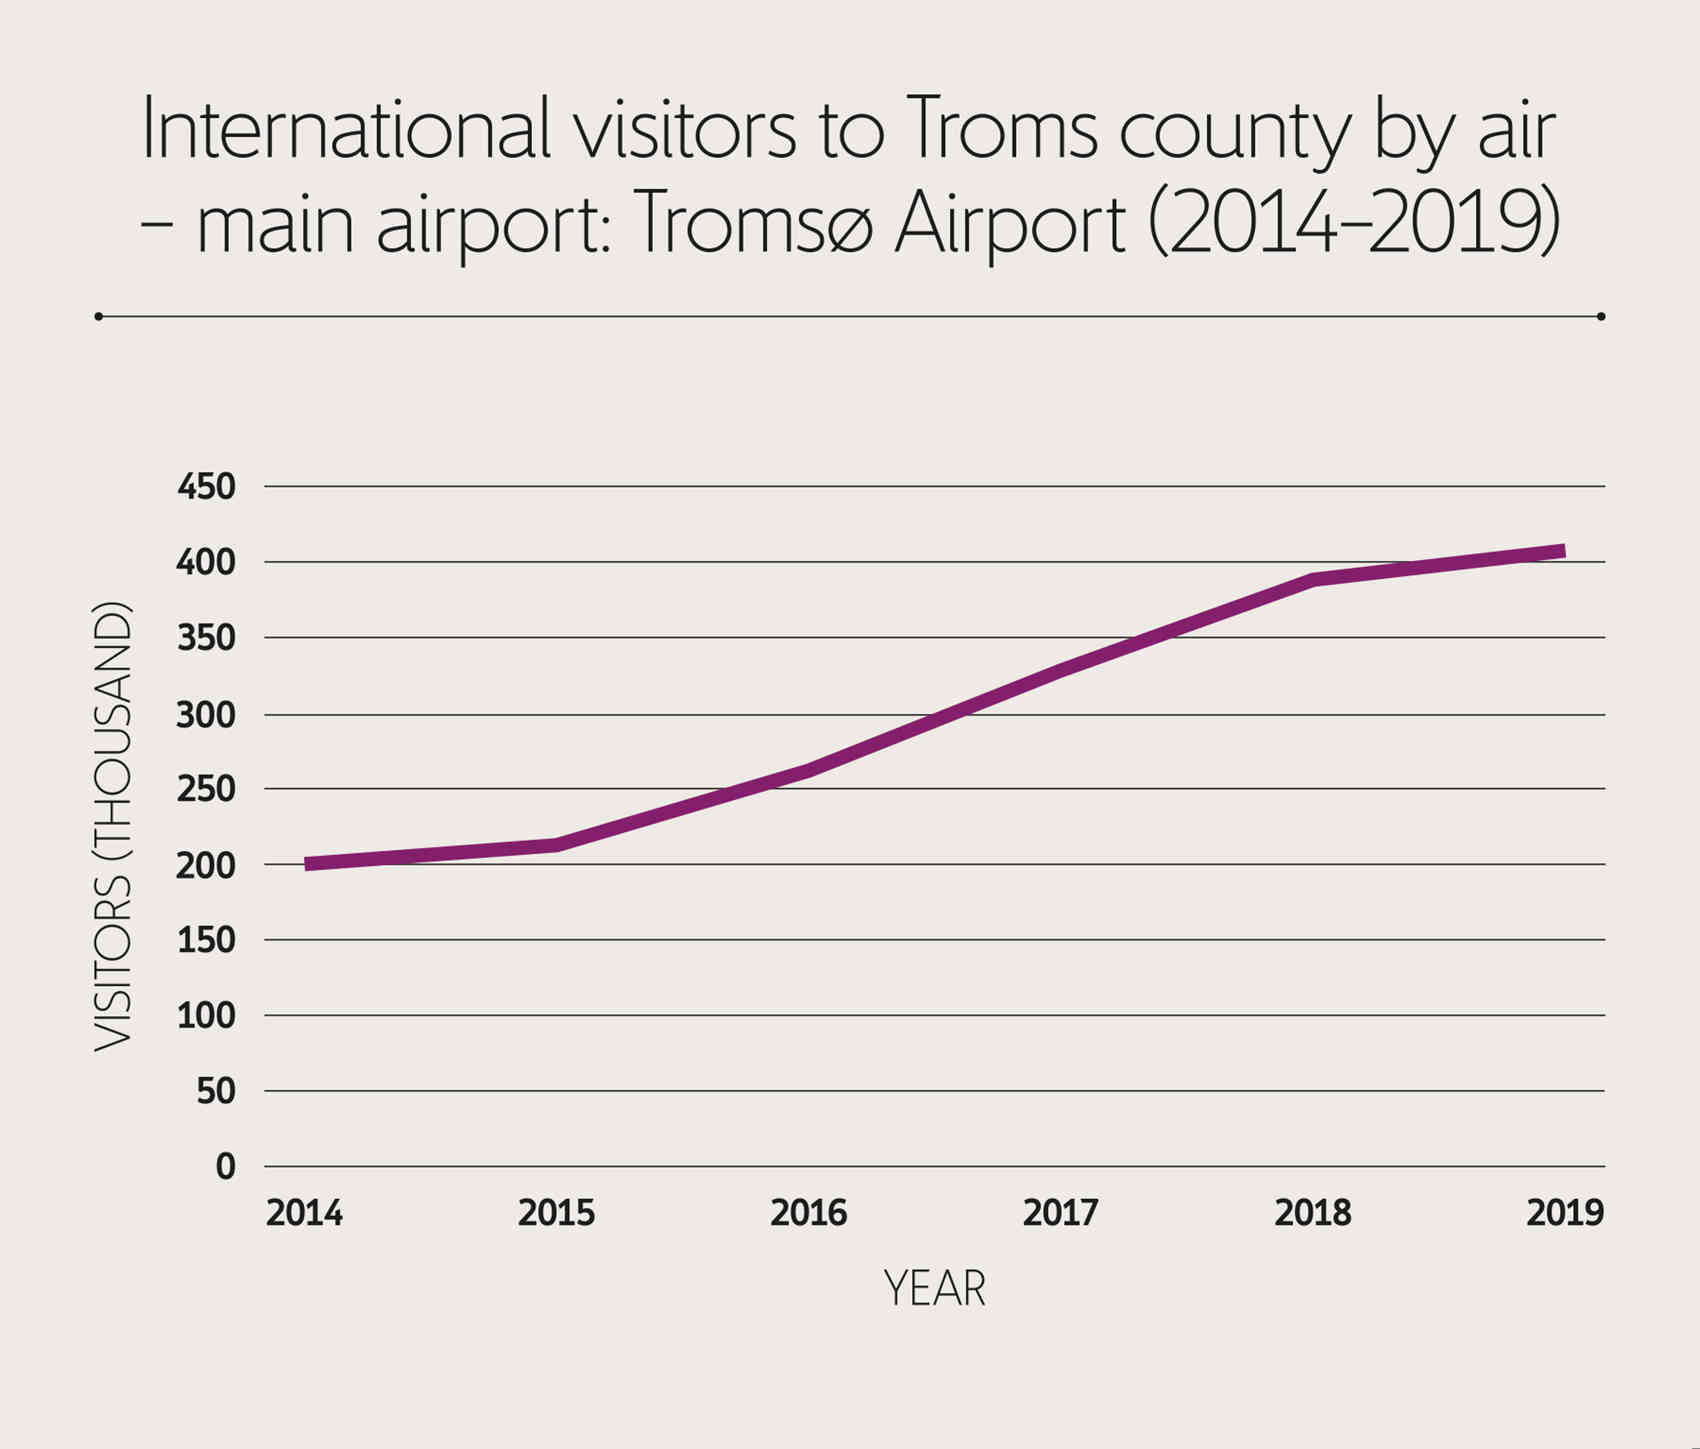 International visitors to Tromso county by air have risen from 200,000 in 2014 to just over 400,000 in 2019.